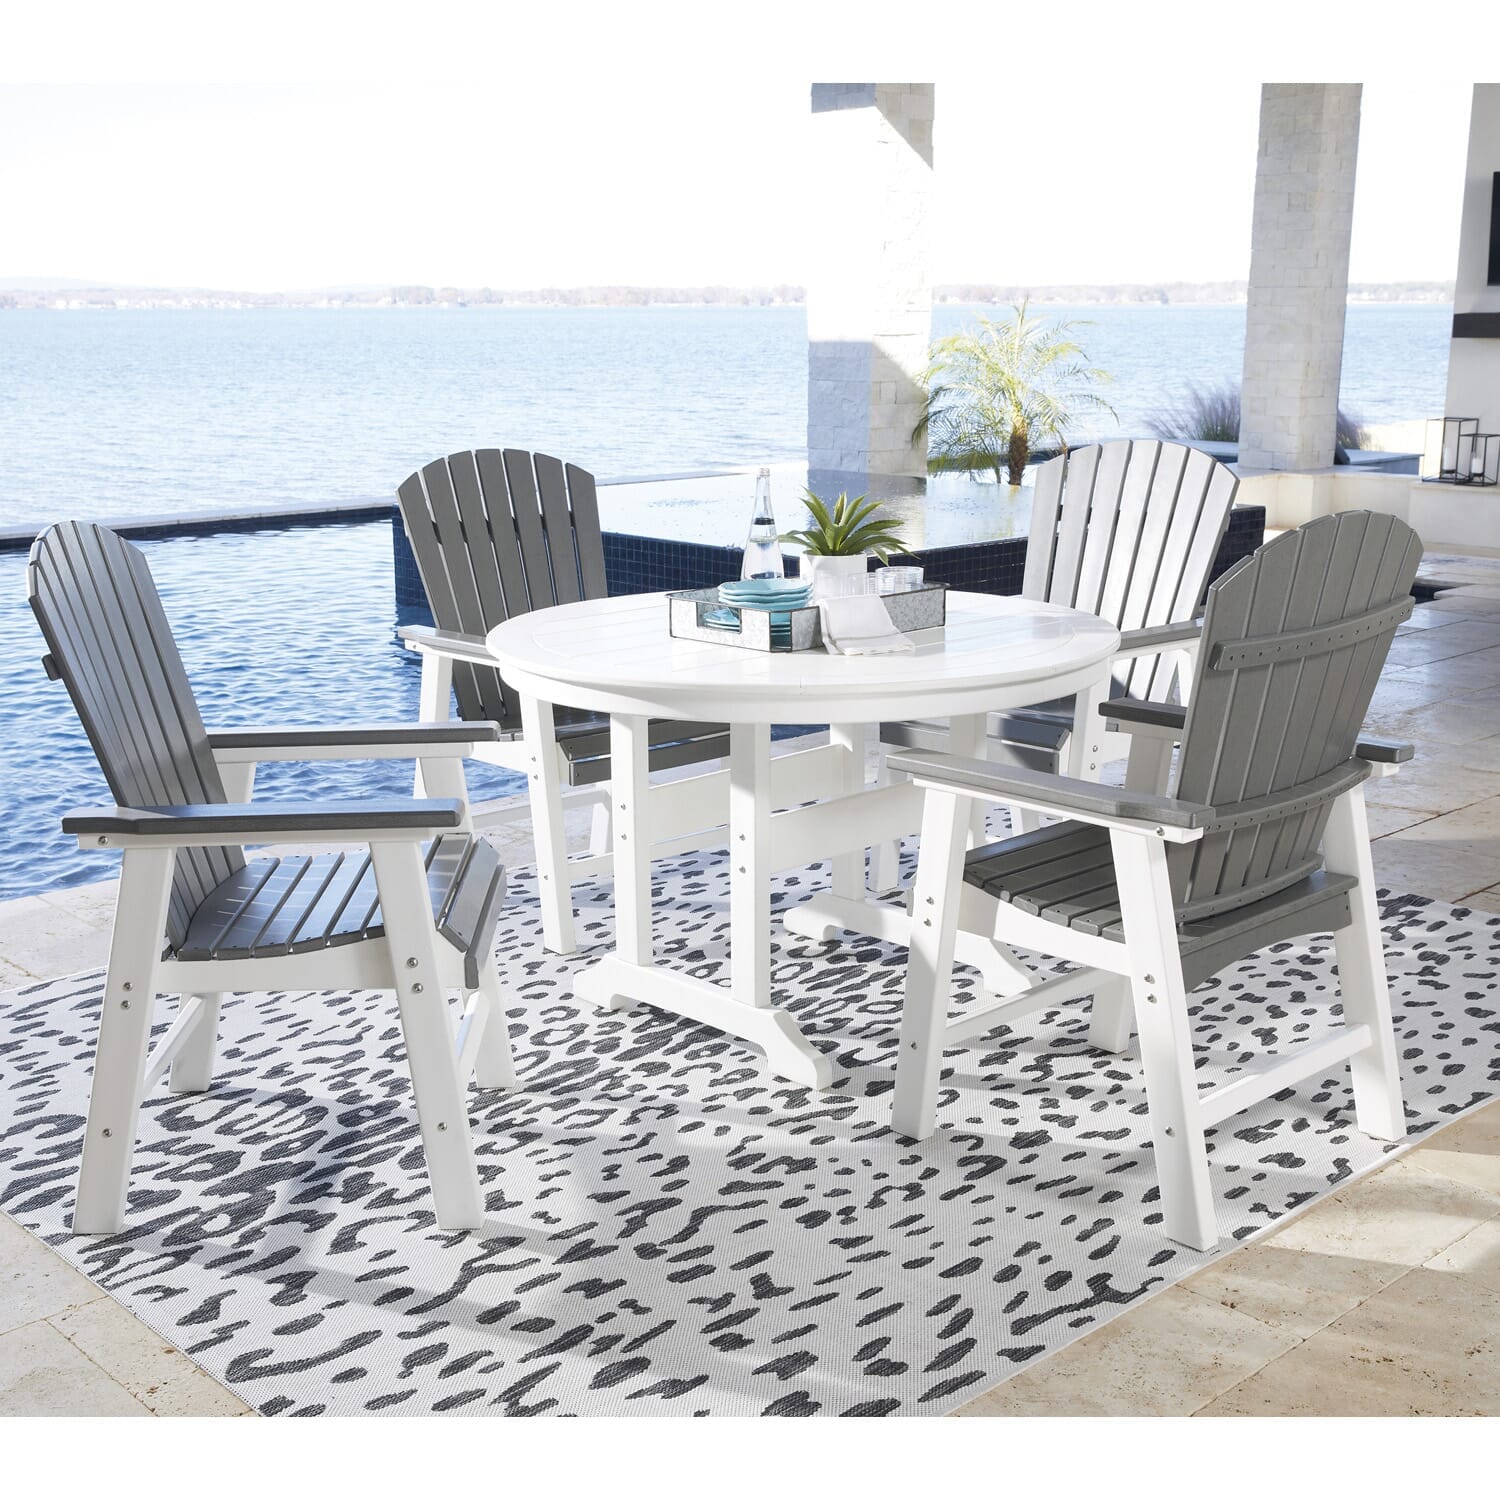 5-pc. Breezy Outdoor Seating Collection overlooking a lake on a sunny day